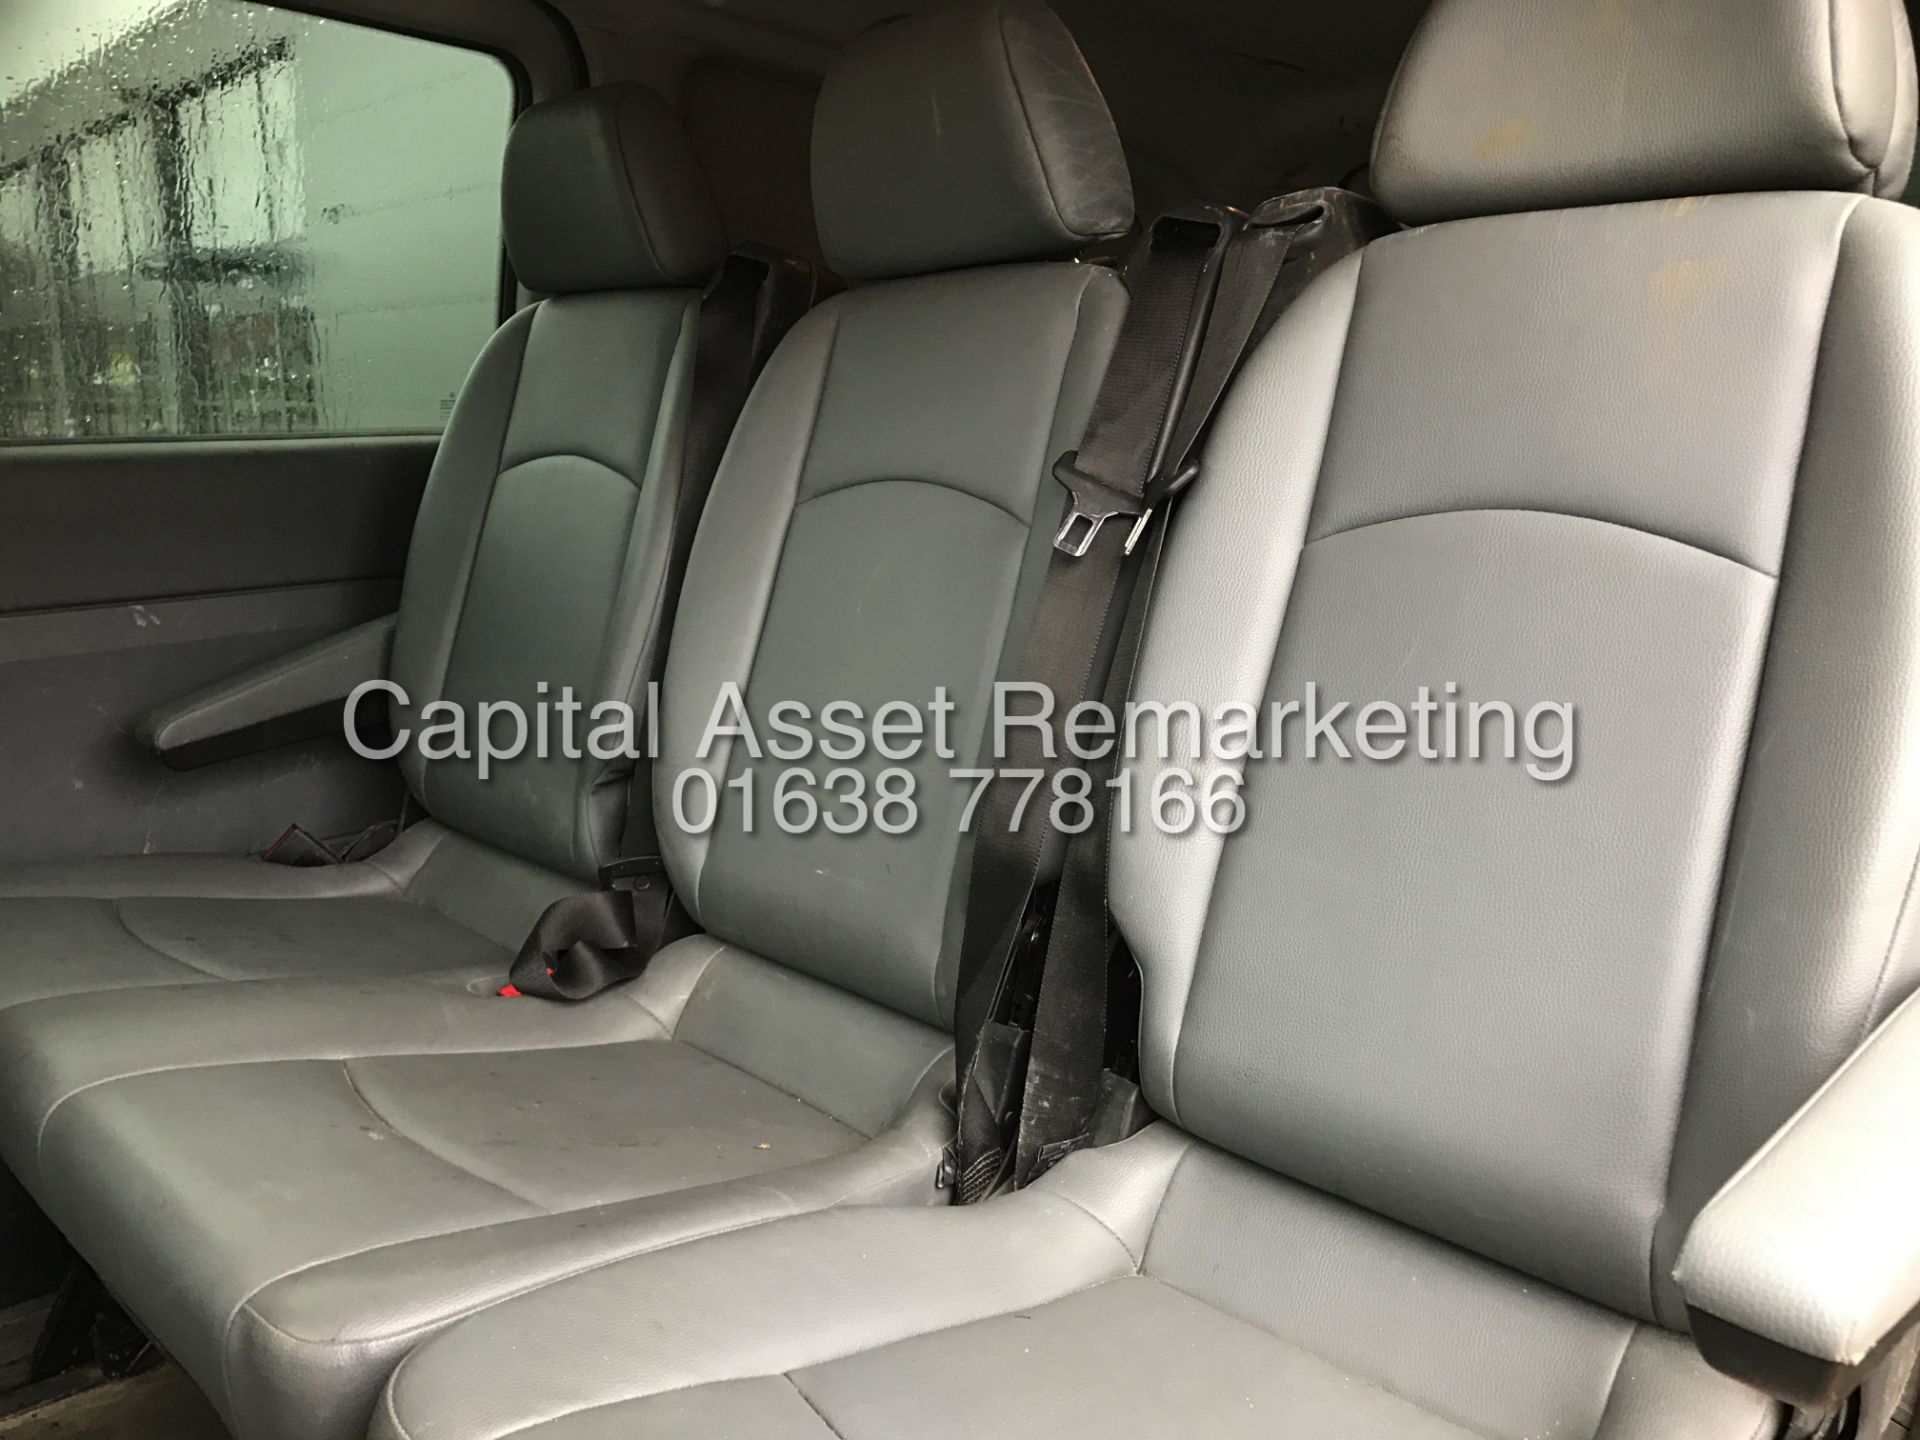 (ON SALE) MERCEDES VITO "SPORTY - 115BHP" LWB (2011 MODEL) 5 SEATER DUELINER -1 OWNER-AIR CON-ALLOYS - Bild 18 aus 18